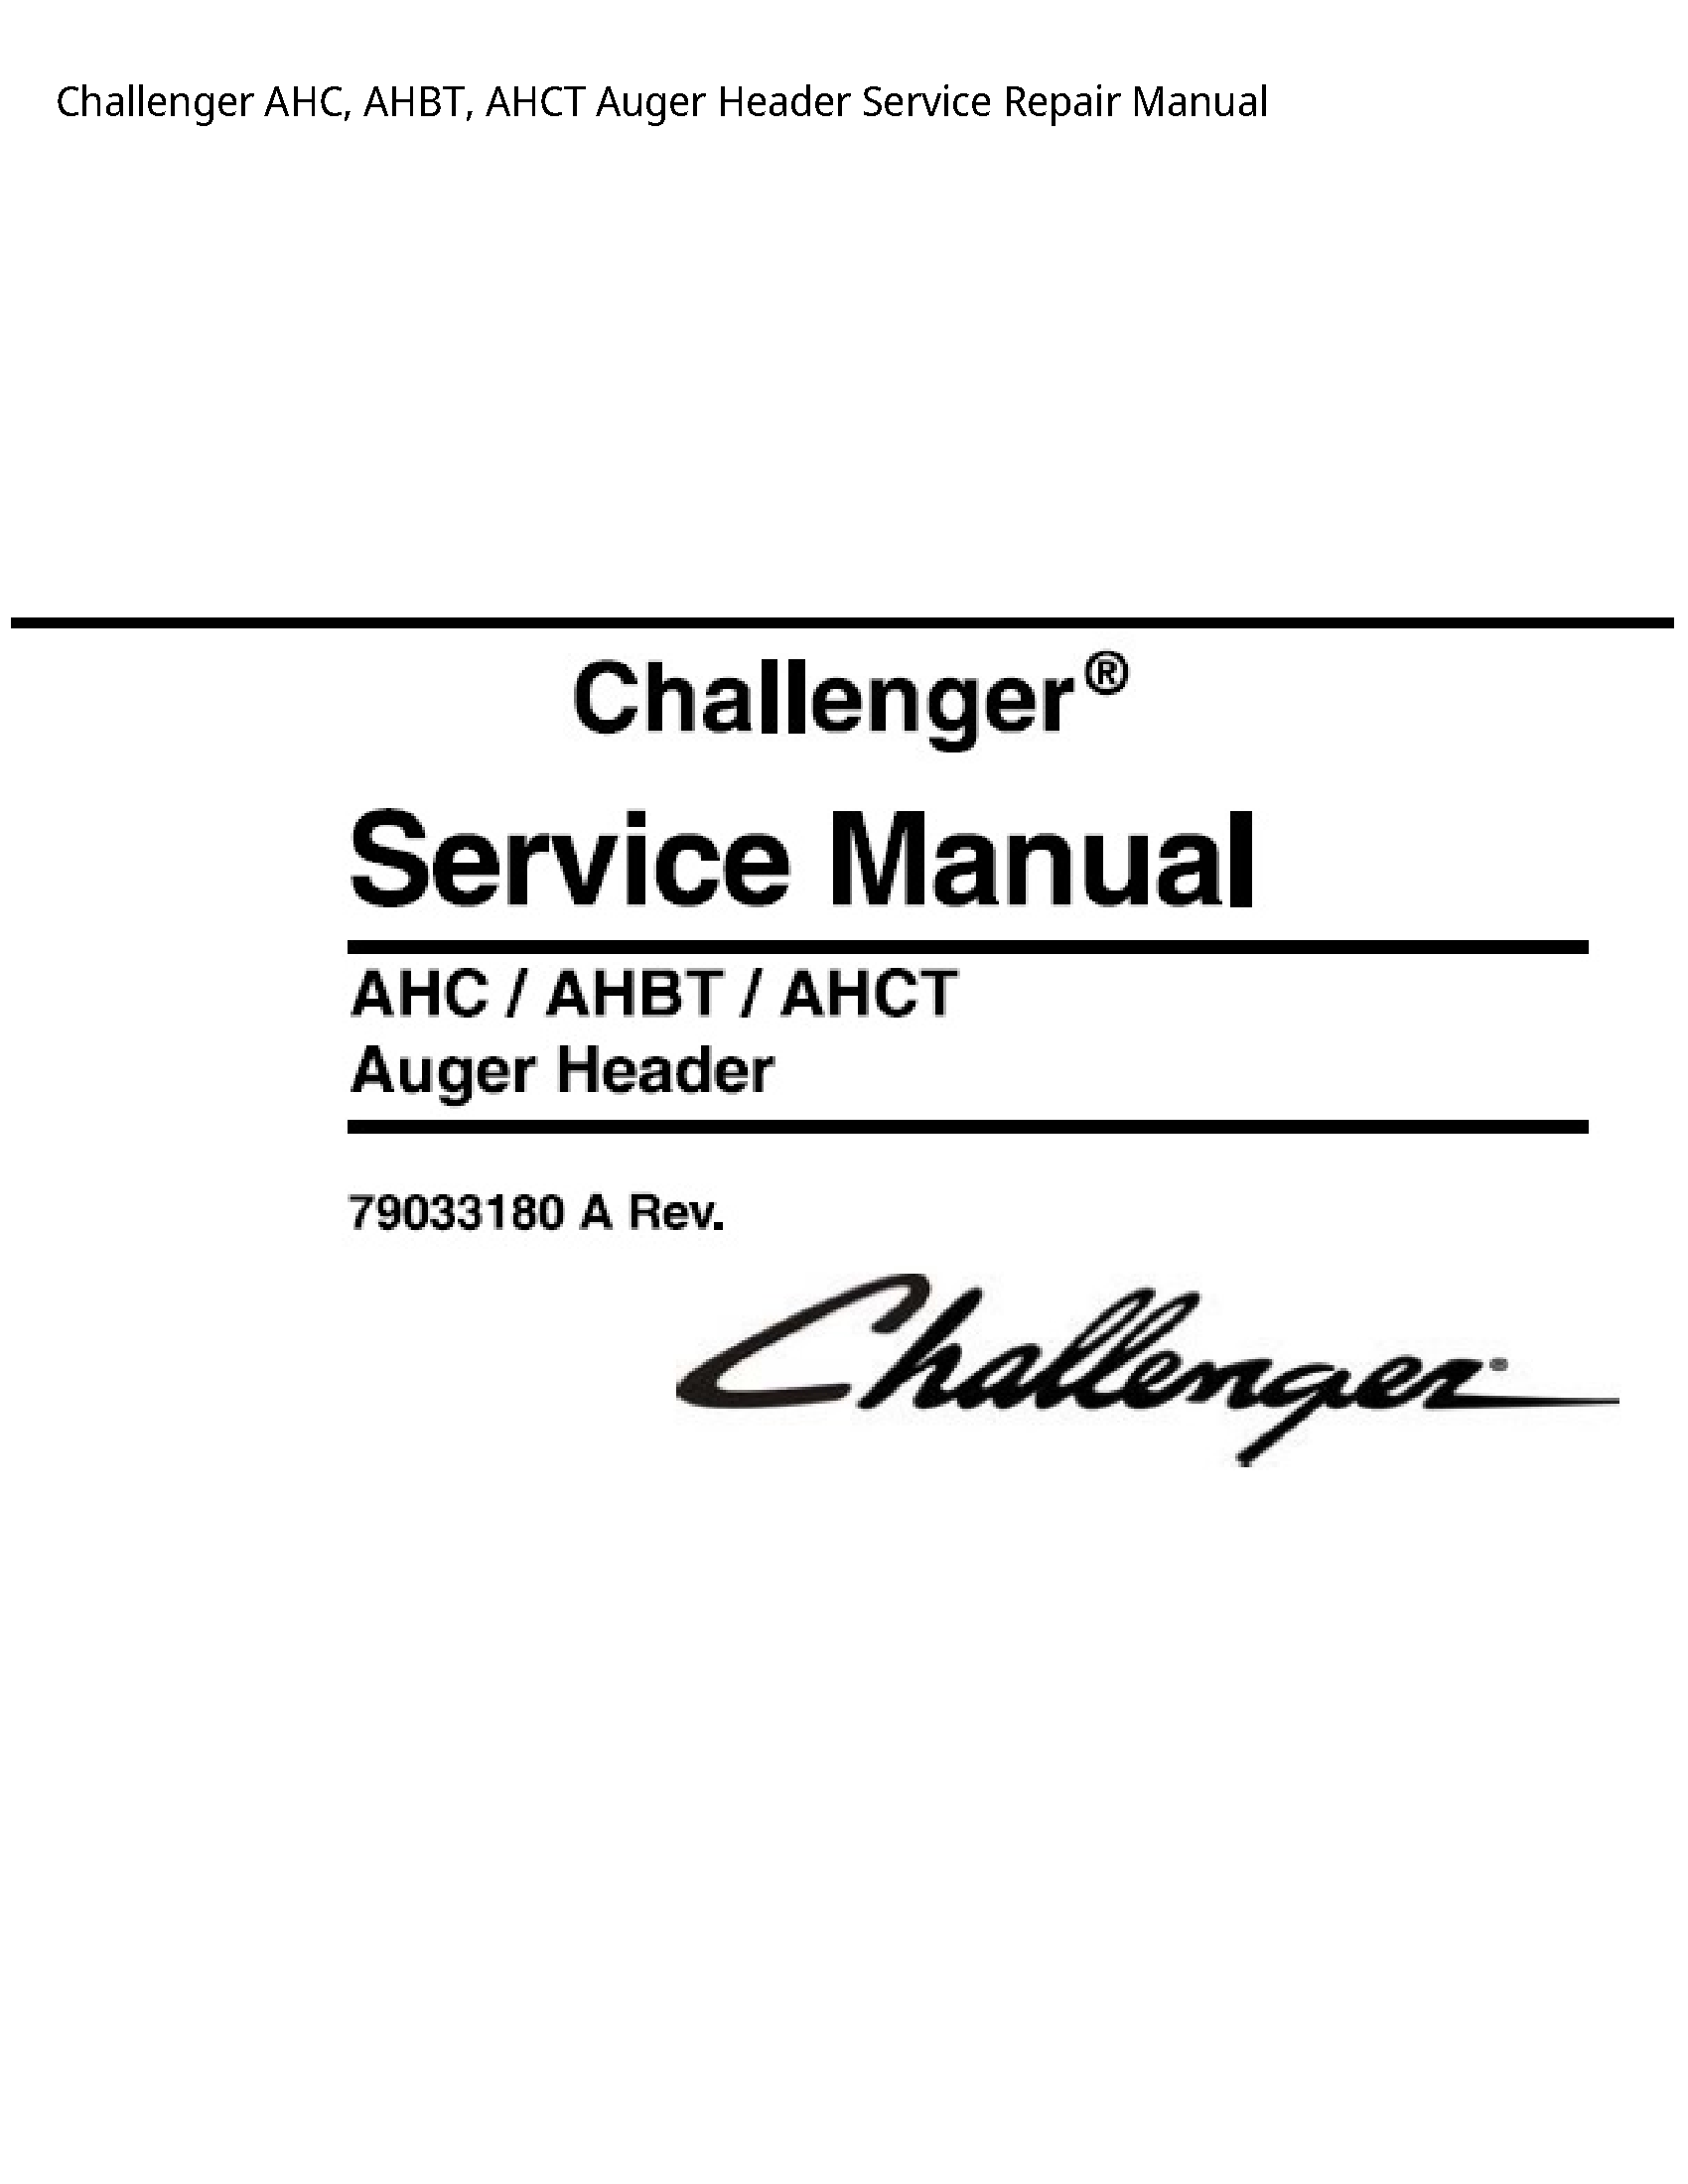 Challenger AHC manual